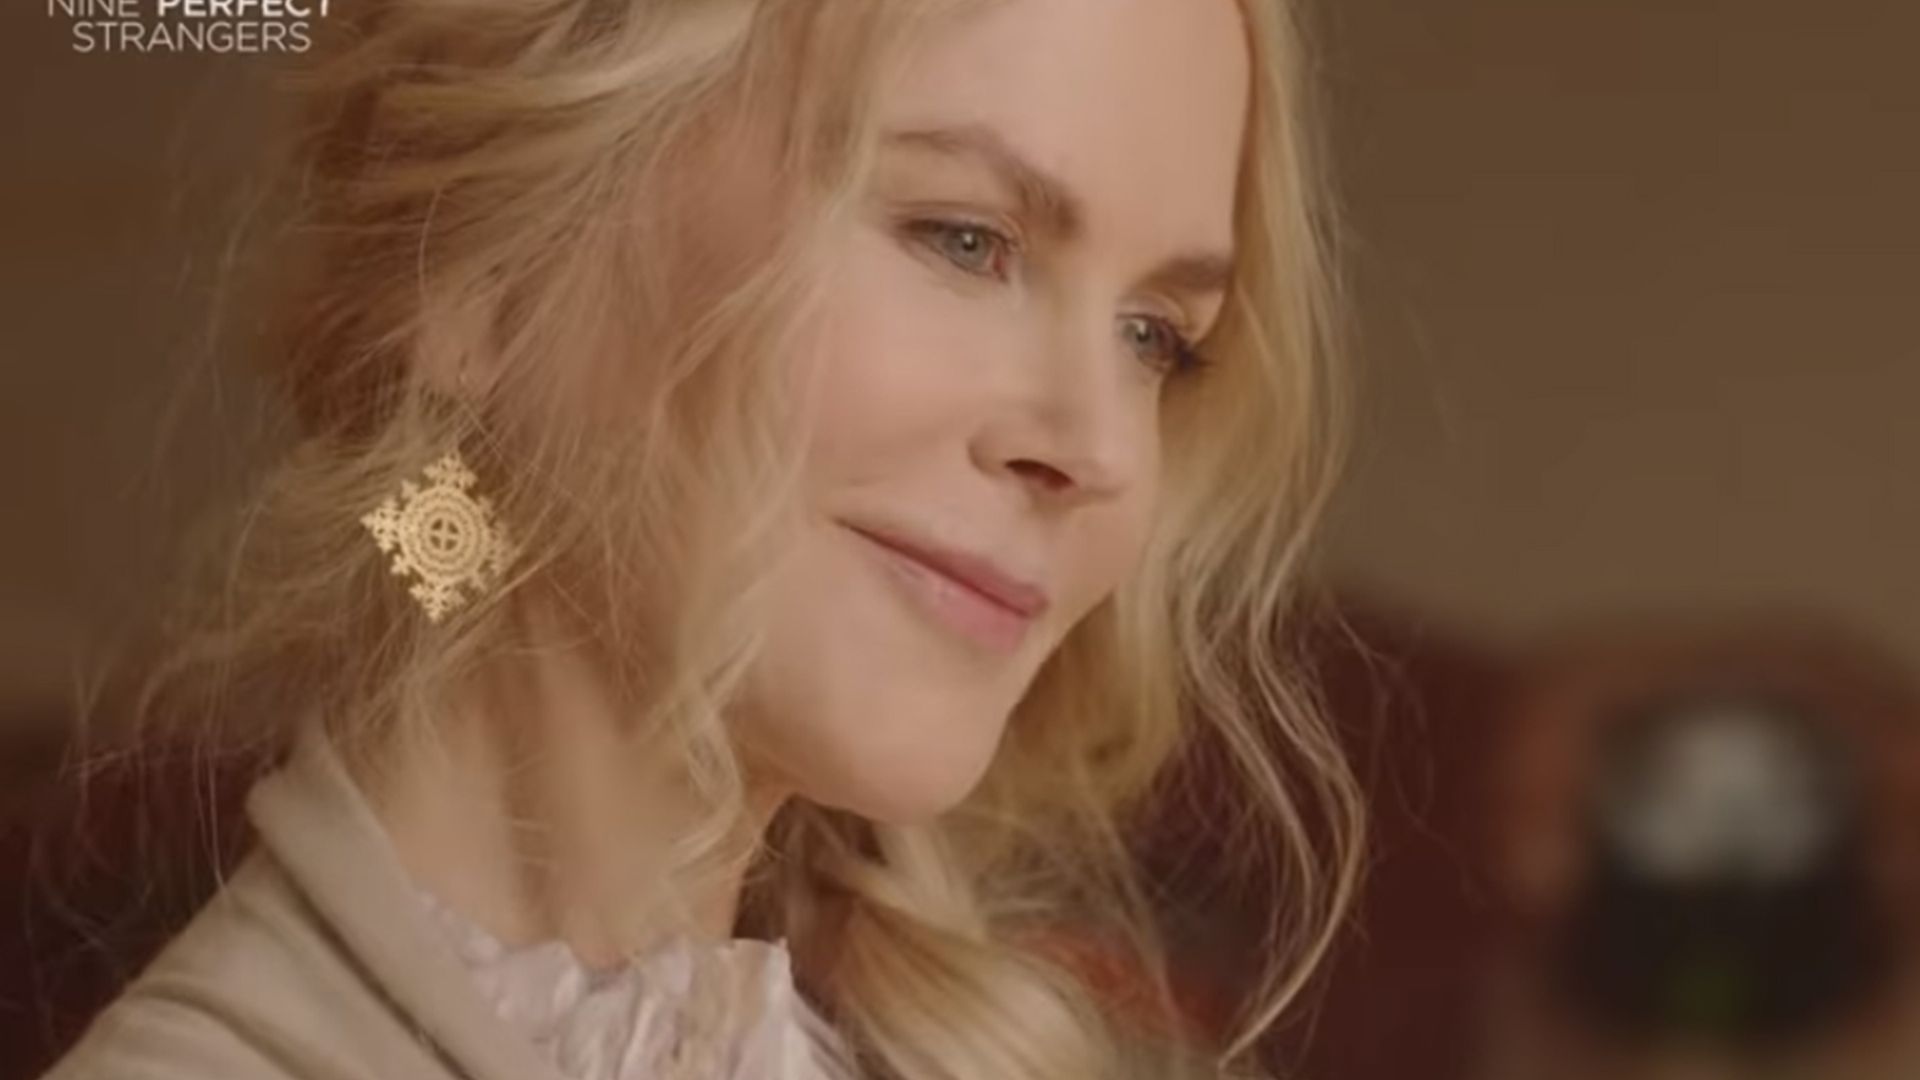 Nicole Kidman speaks candidly about major downside to filming Nine Perfect Strangers